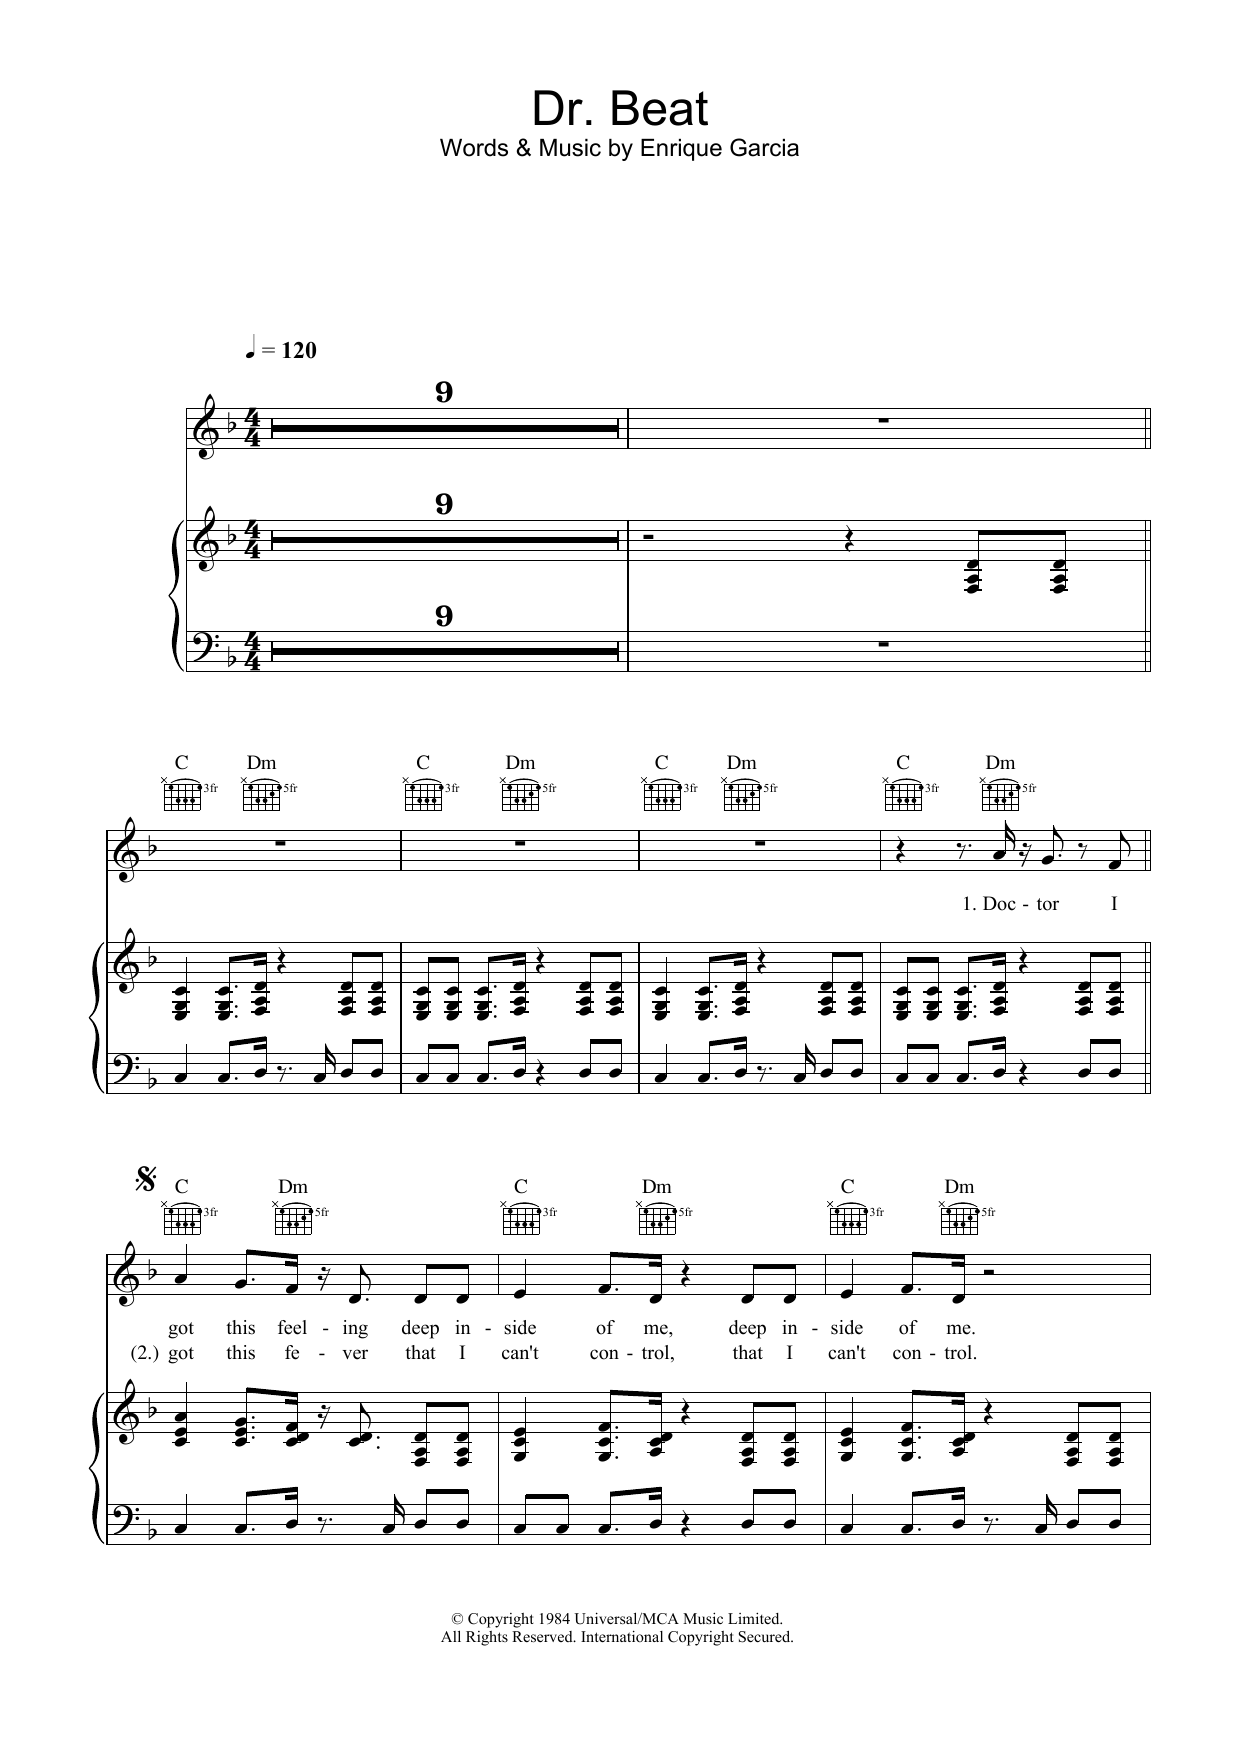 Miami Sound Machine Dr. Beat sheet music notes and chords. Download Printable PDF.